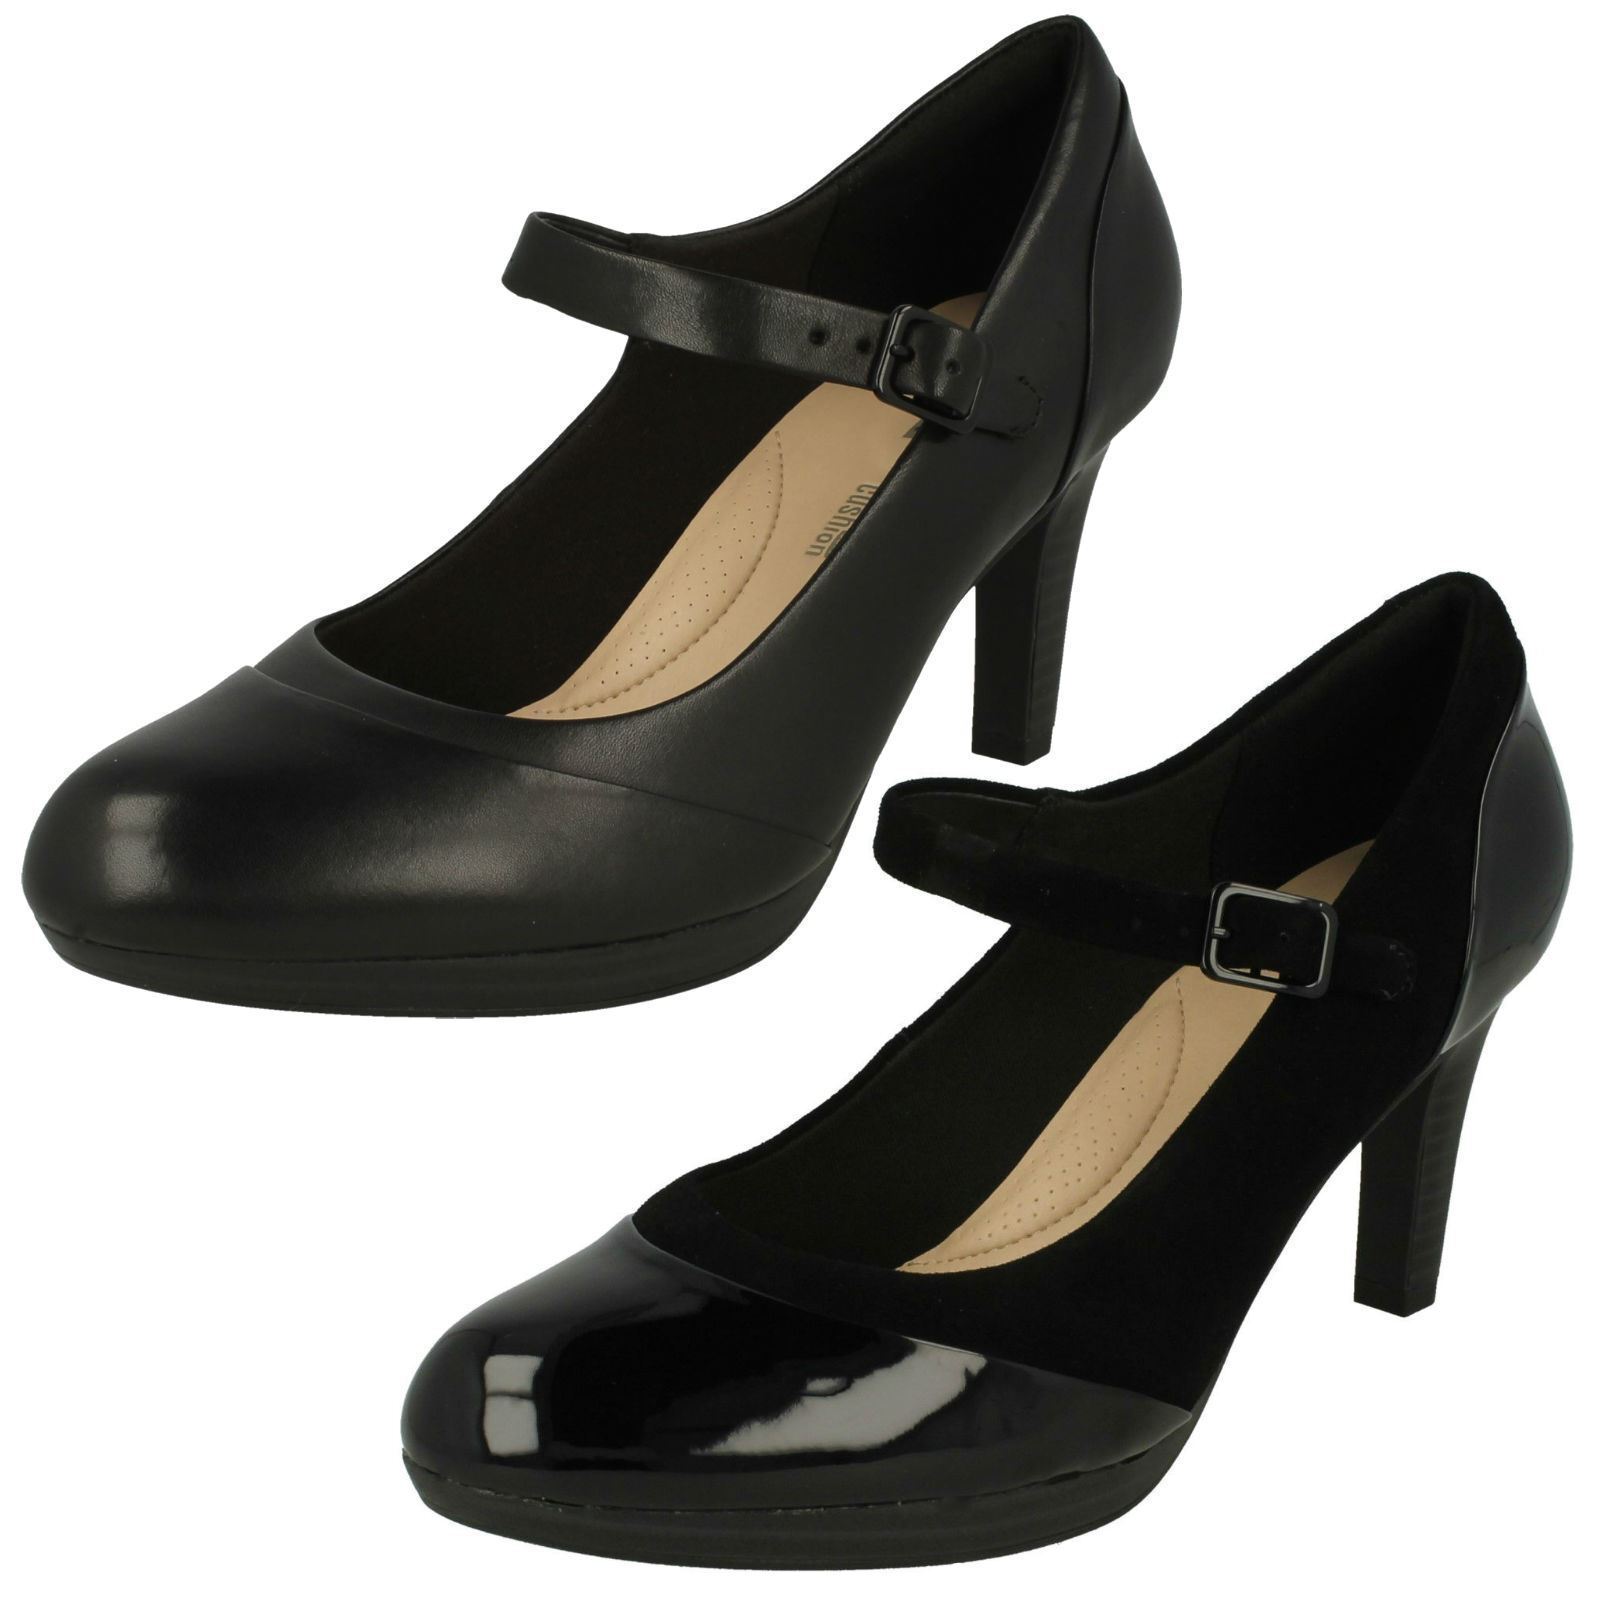 Womens Clarks Adriel Free shipping anywhere in the nation Carla Popularity Black Smart Pumps Jane Mary